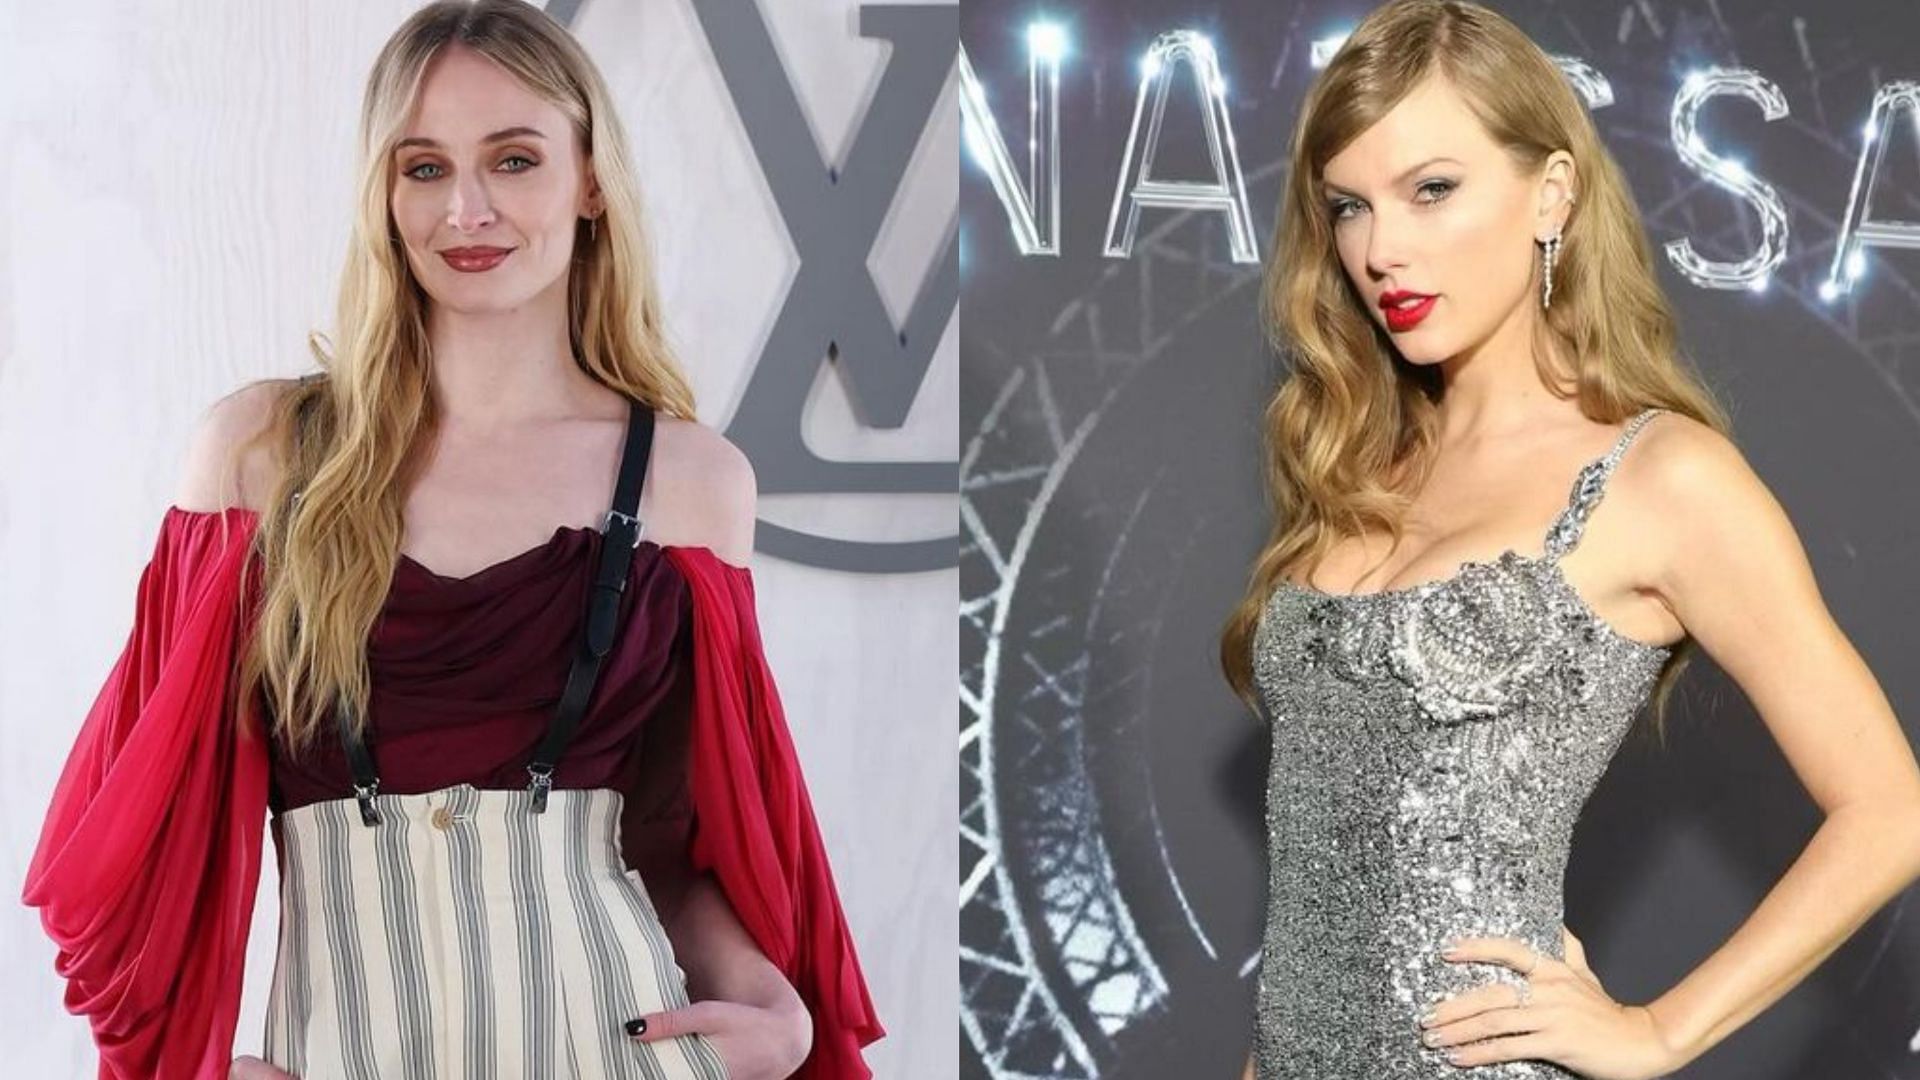 Turner recalled how Swift helped her through the divorce (Image via Instagram/@sophiet and @taylorswift)